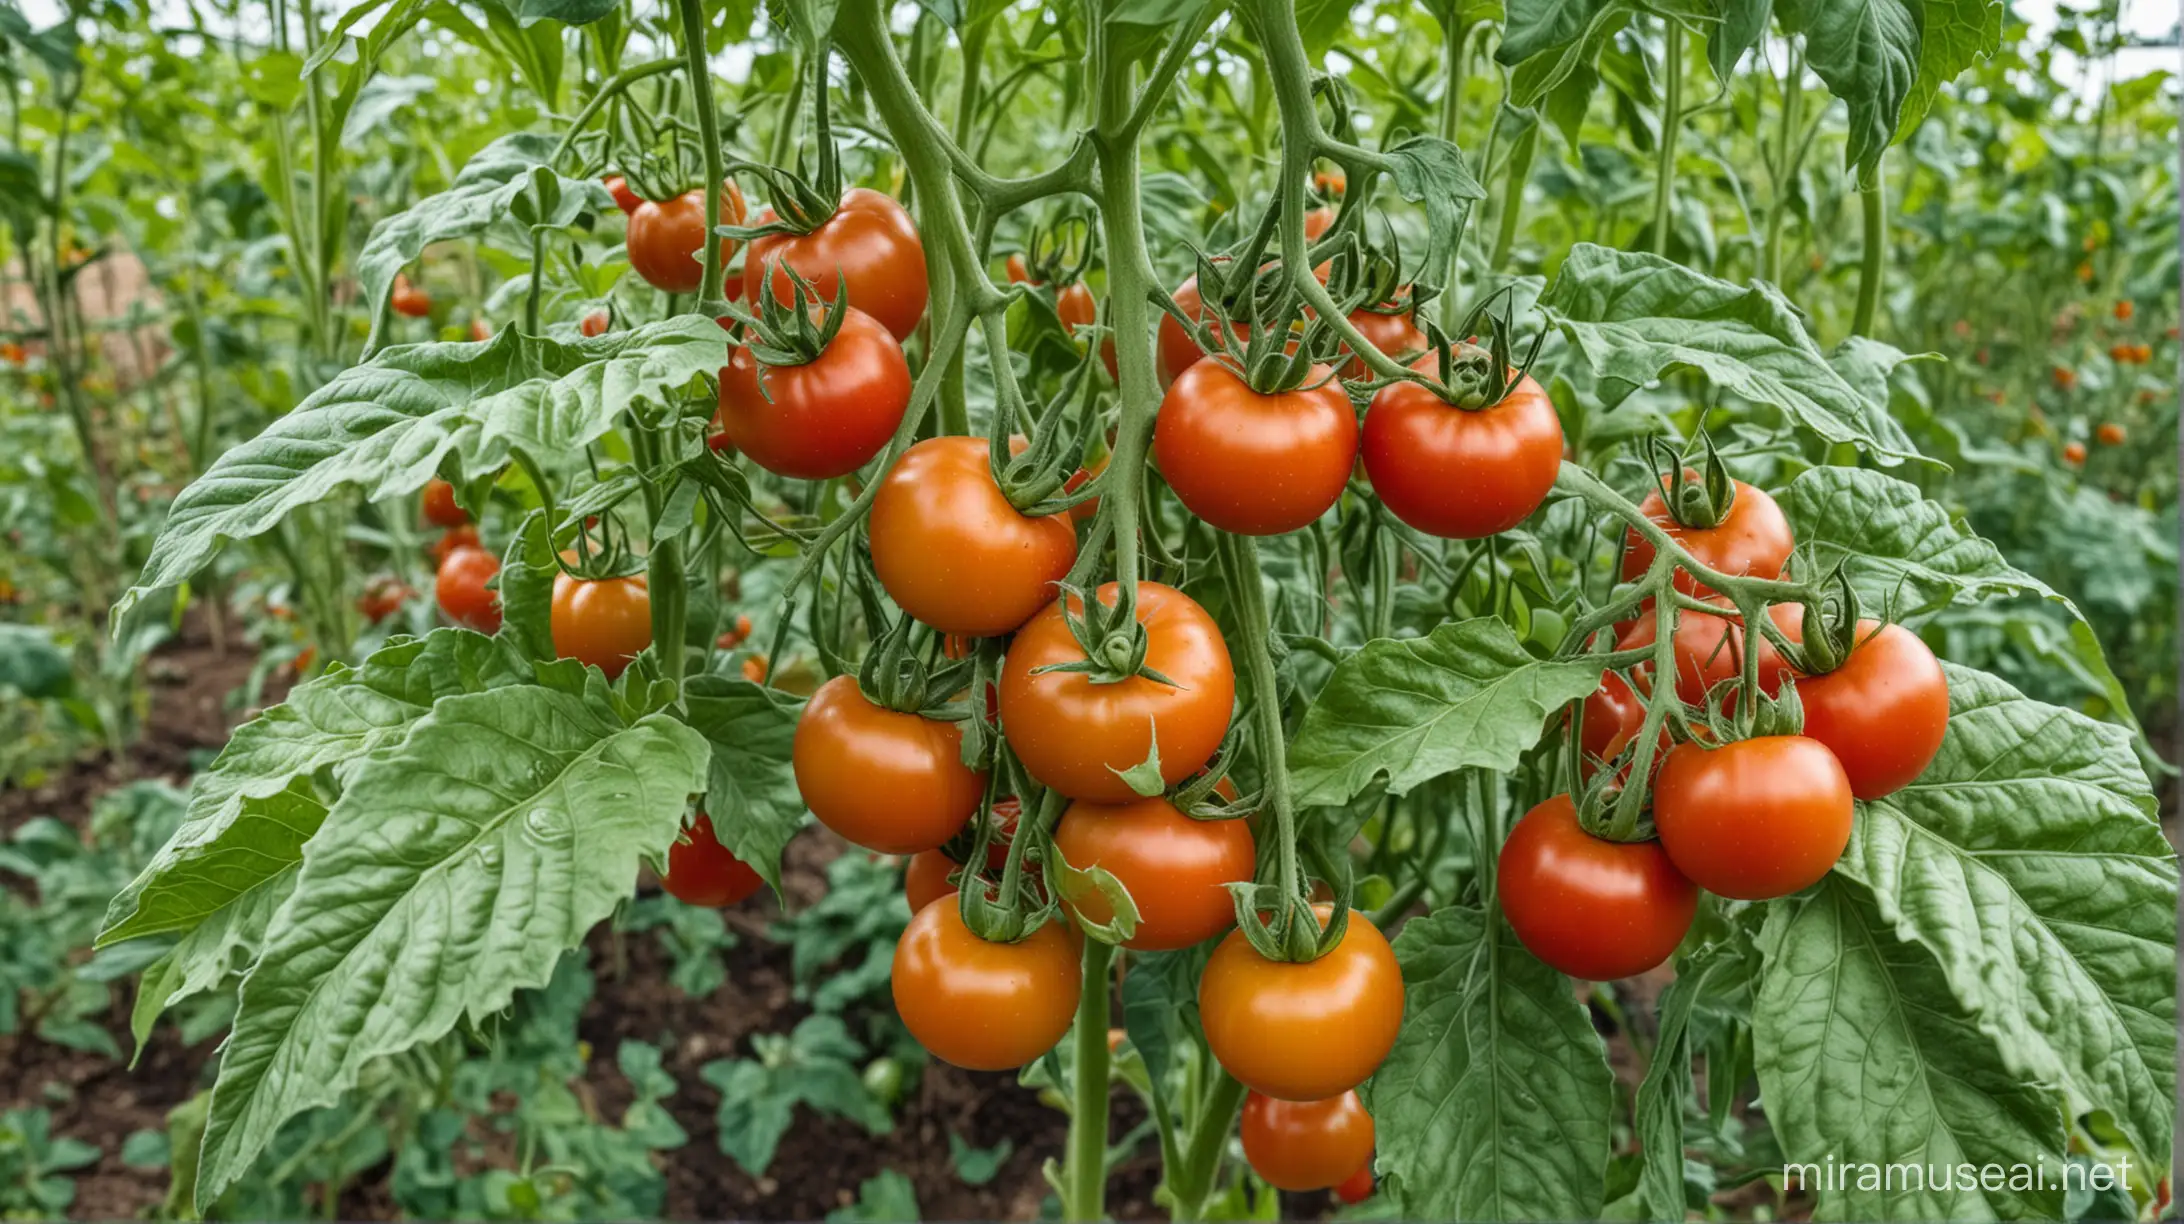 Vibrant Tomato Plant with Bountiful Harvest Real Image of Prosperous Deficiency